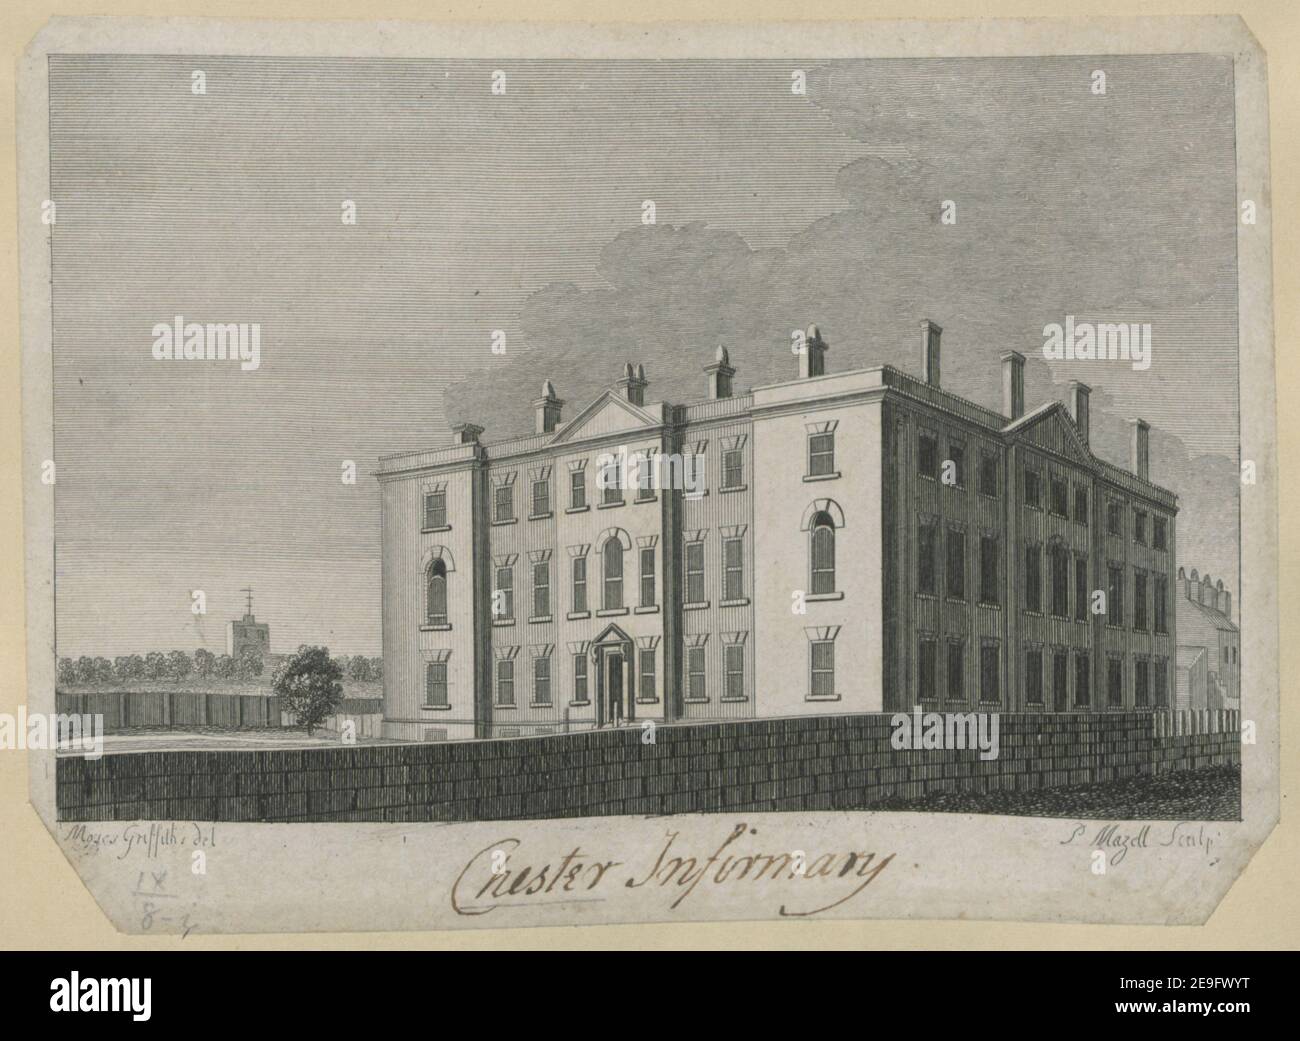 Chester Infirmary.   Author  Mazell, Peter 9.8.i. Place of publication: [London] Publisher: [unidentified publisher]., Date of publication: [1767-1797 c.]  Item type: 1 print Medium: etching Dimensions: sheet 13.5 x 18.7 cm [trimmed within platemark]  Former owner: George III, King of Great Britain, 1738-1820 Stock Photo